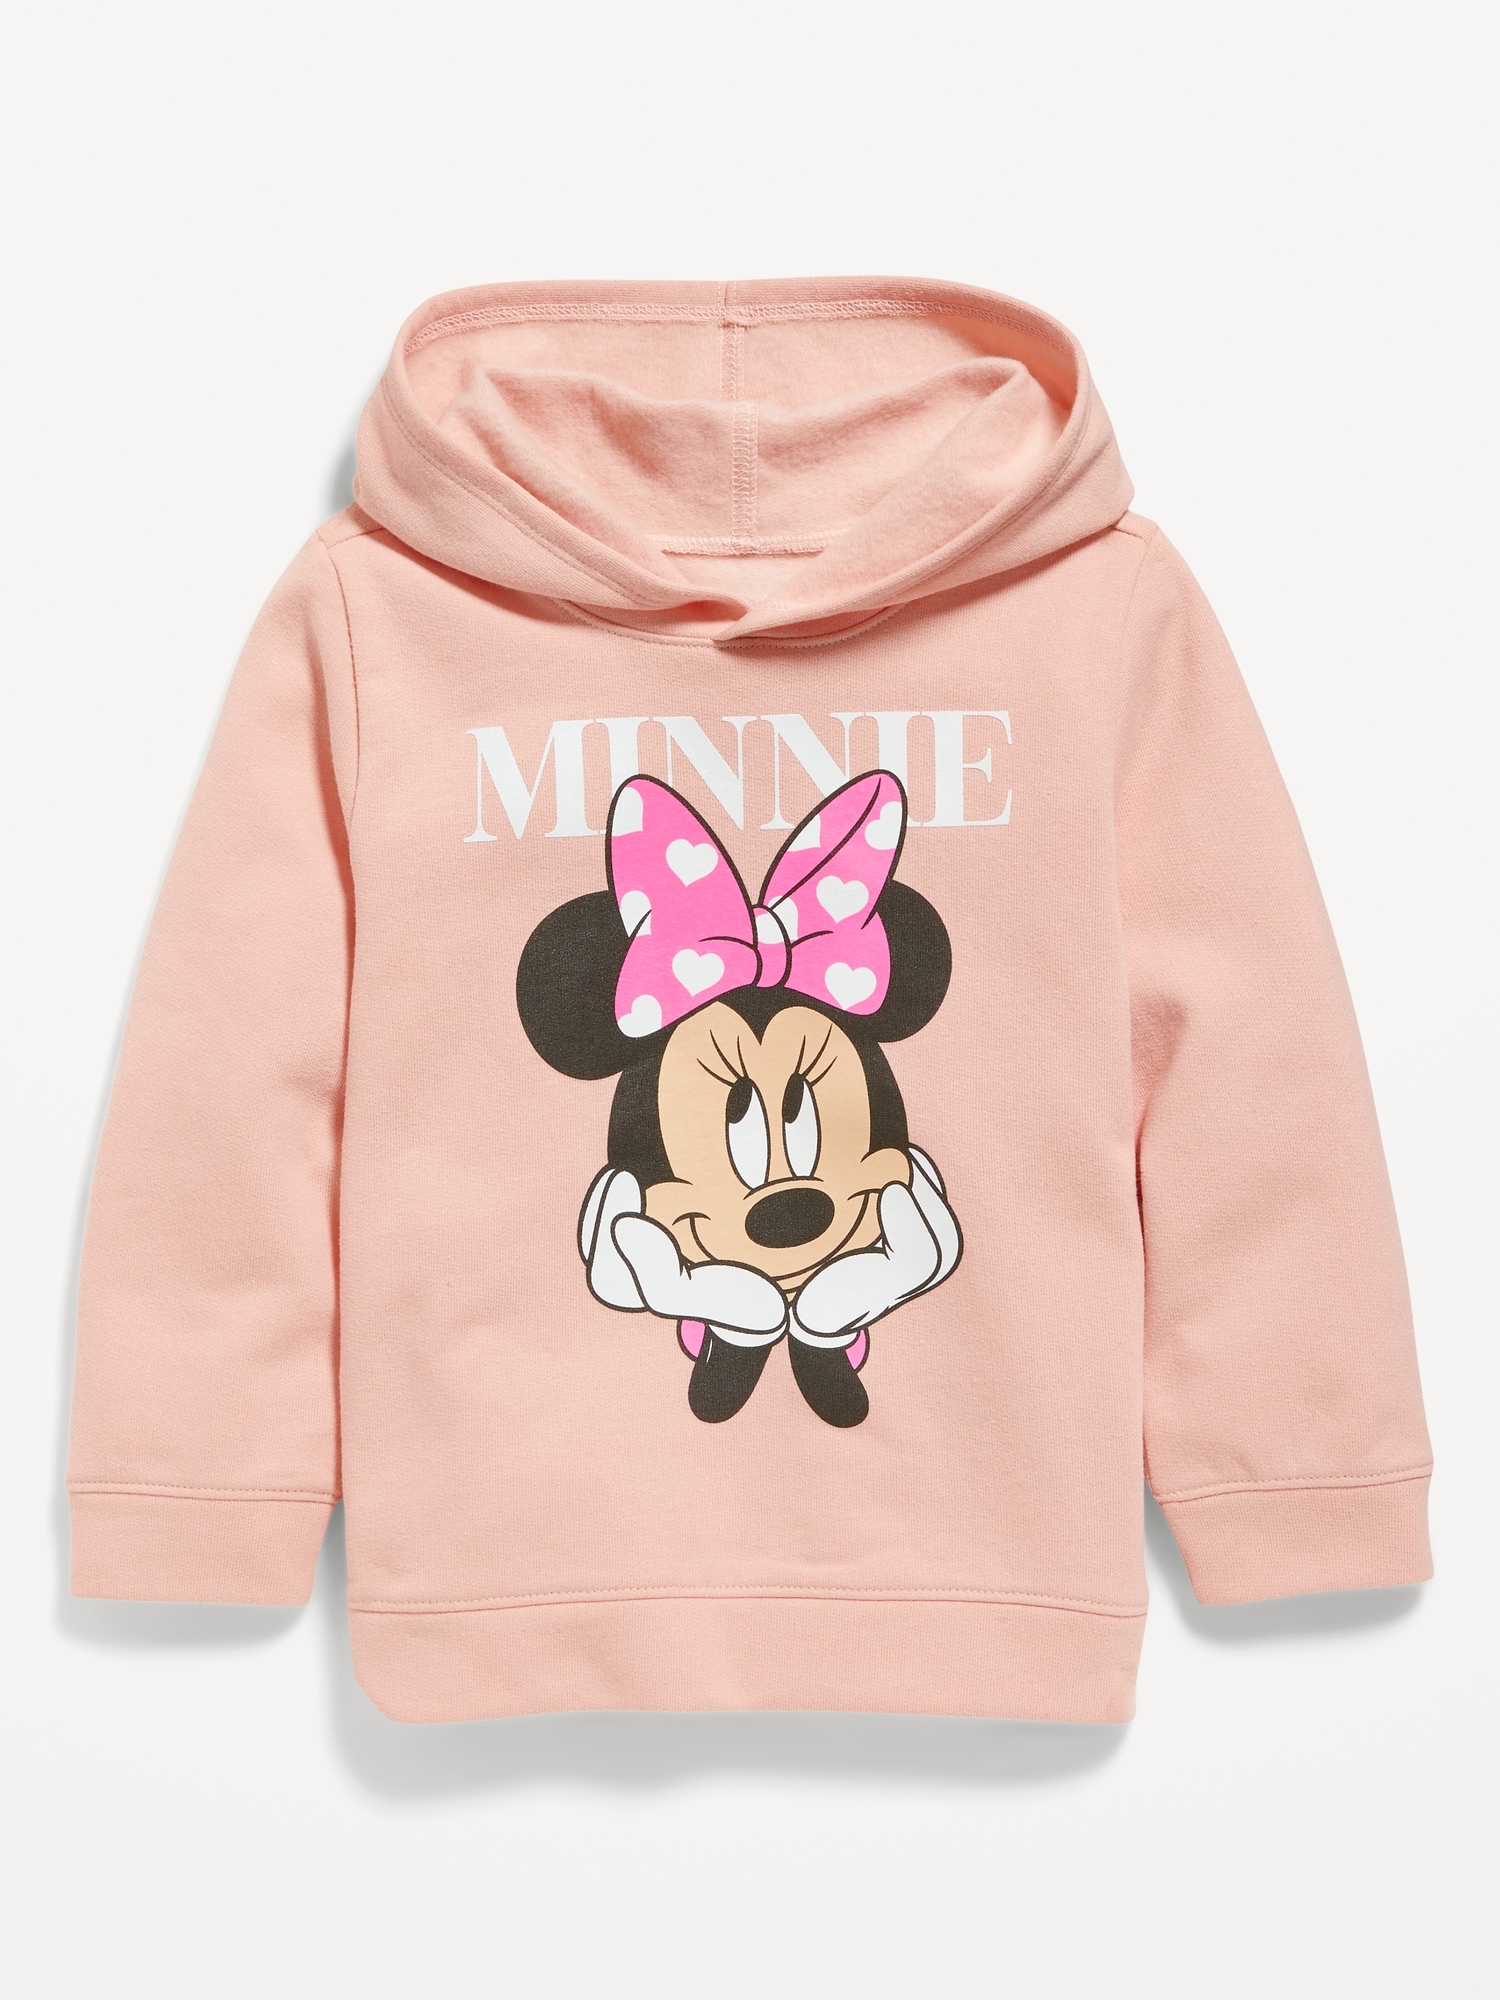 Unisex Disney© Minnie Mouse Graphic Hoodie for Toddler